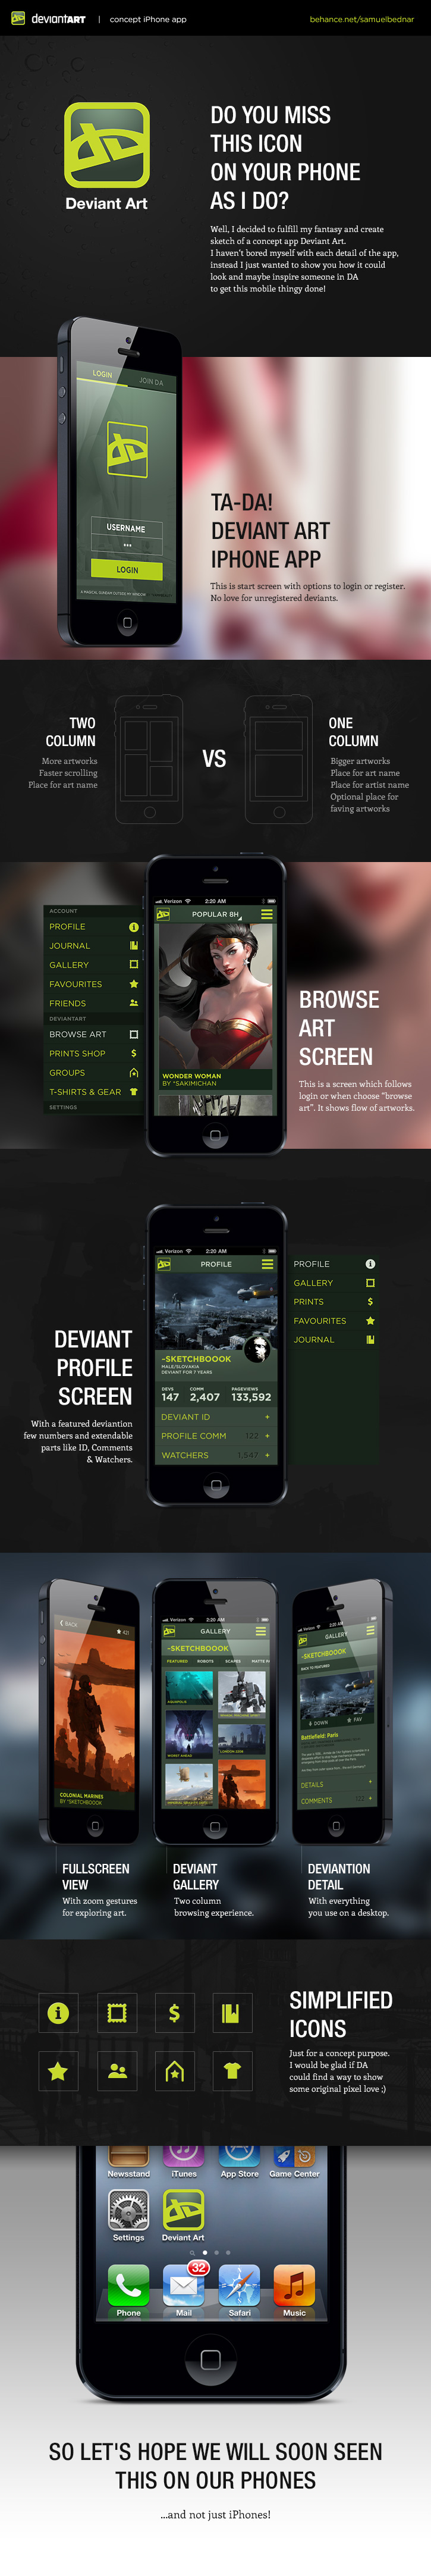 deviant art Deviantart iphone app ios android smartphone concept fan application mobile gallery